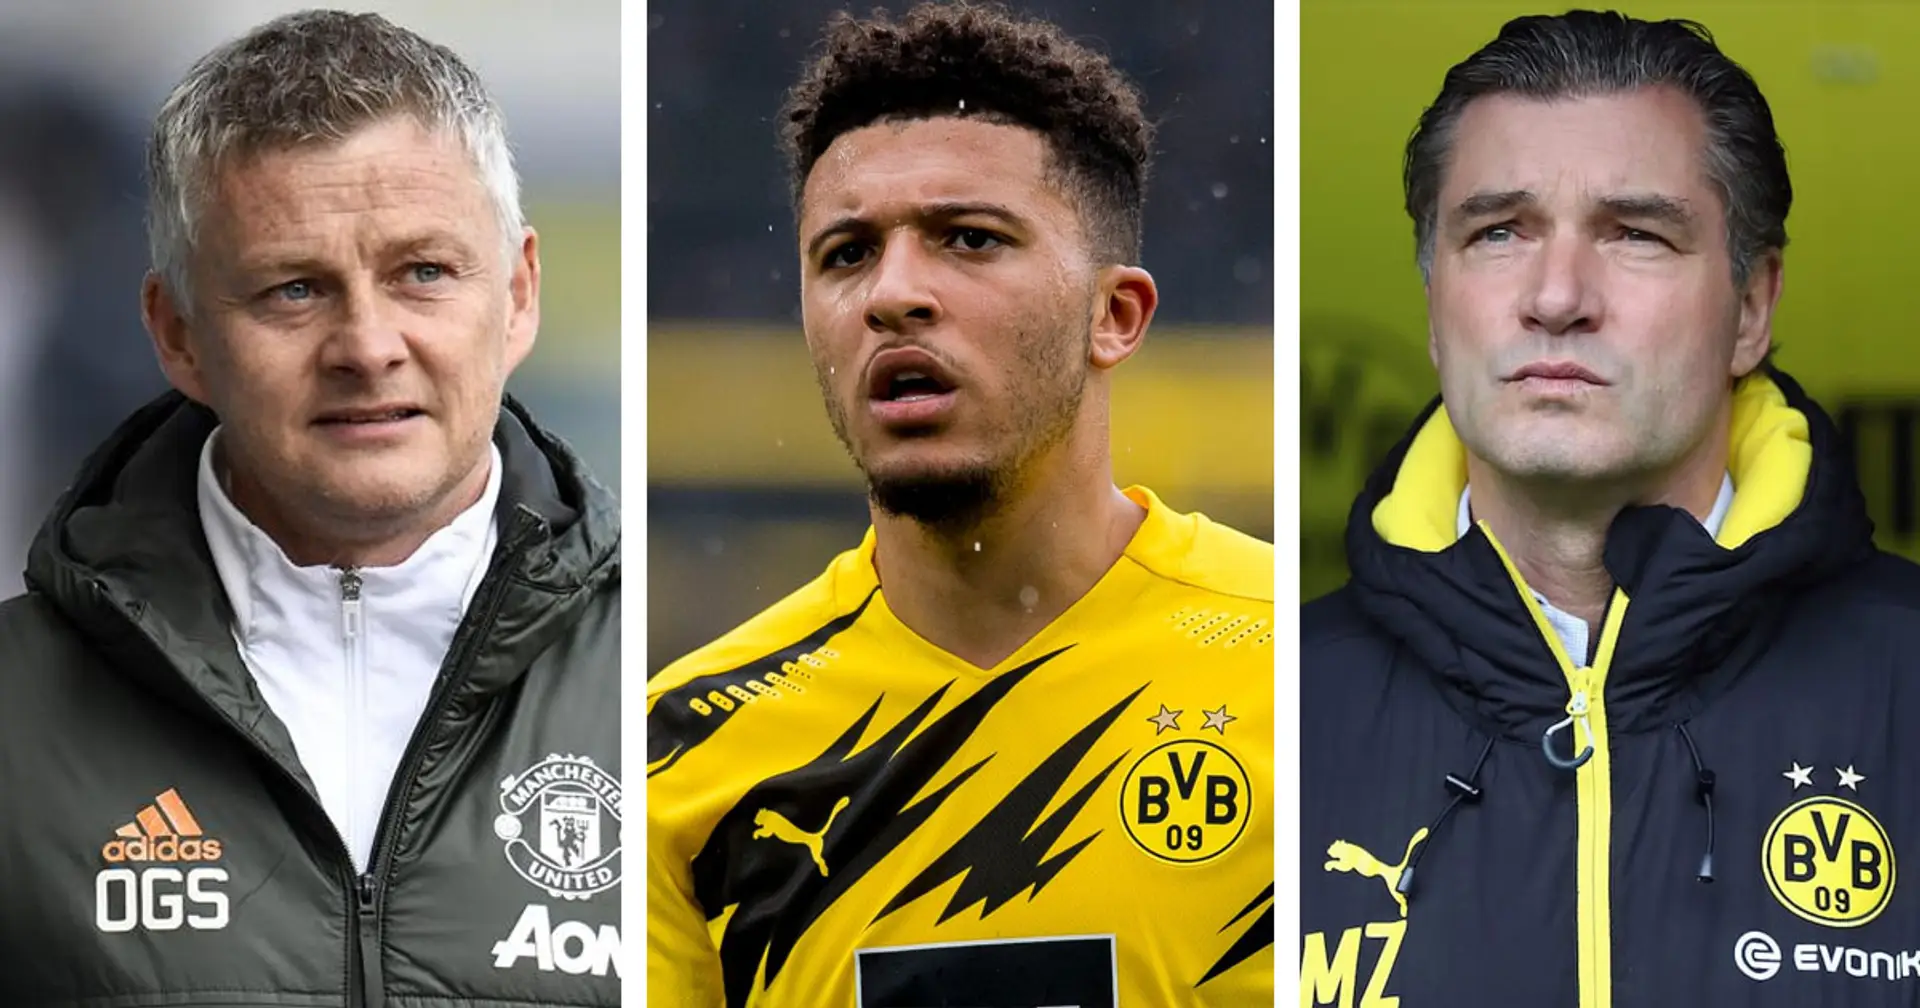 Dortmund's fee and deadline, Jadon's stance & more: Latest on Sancho saga with transfer probability rating